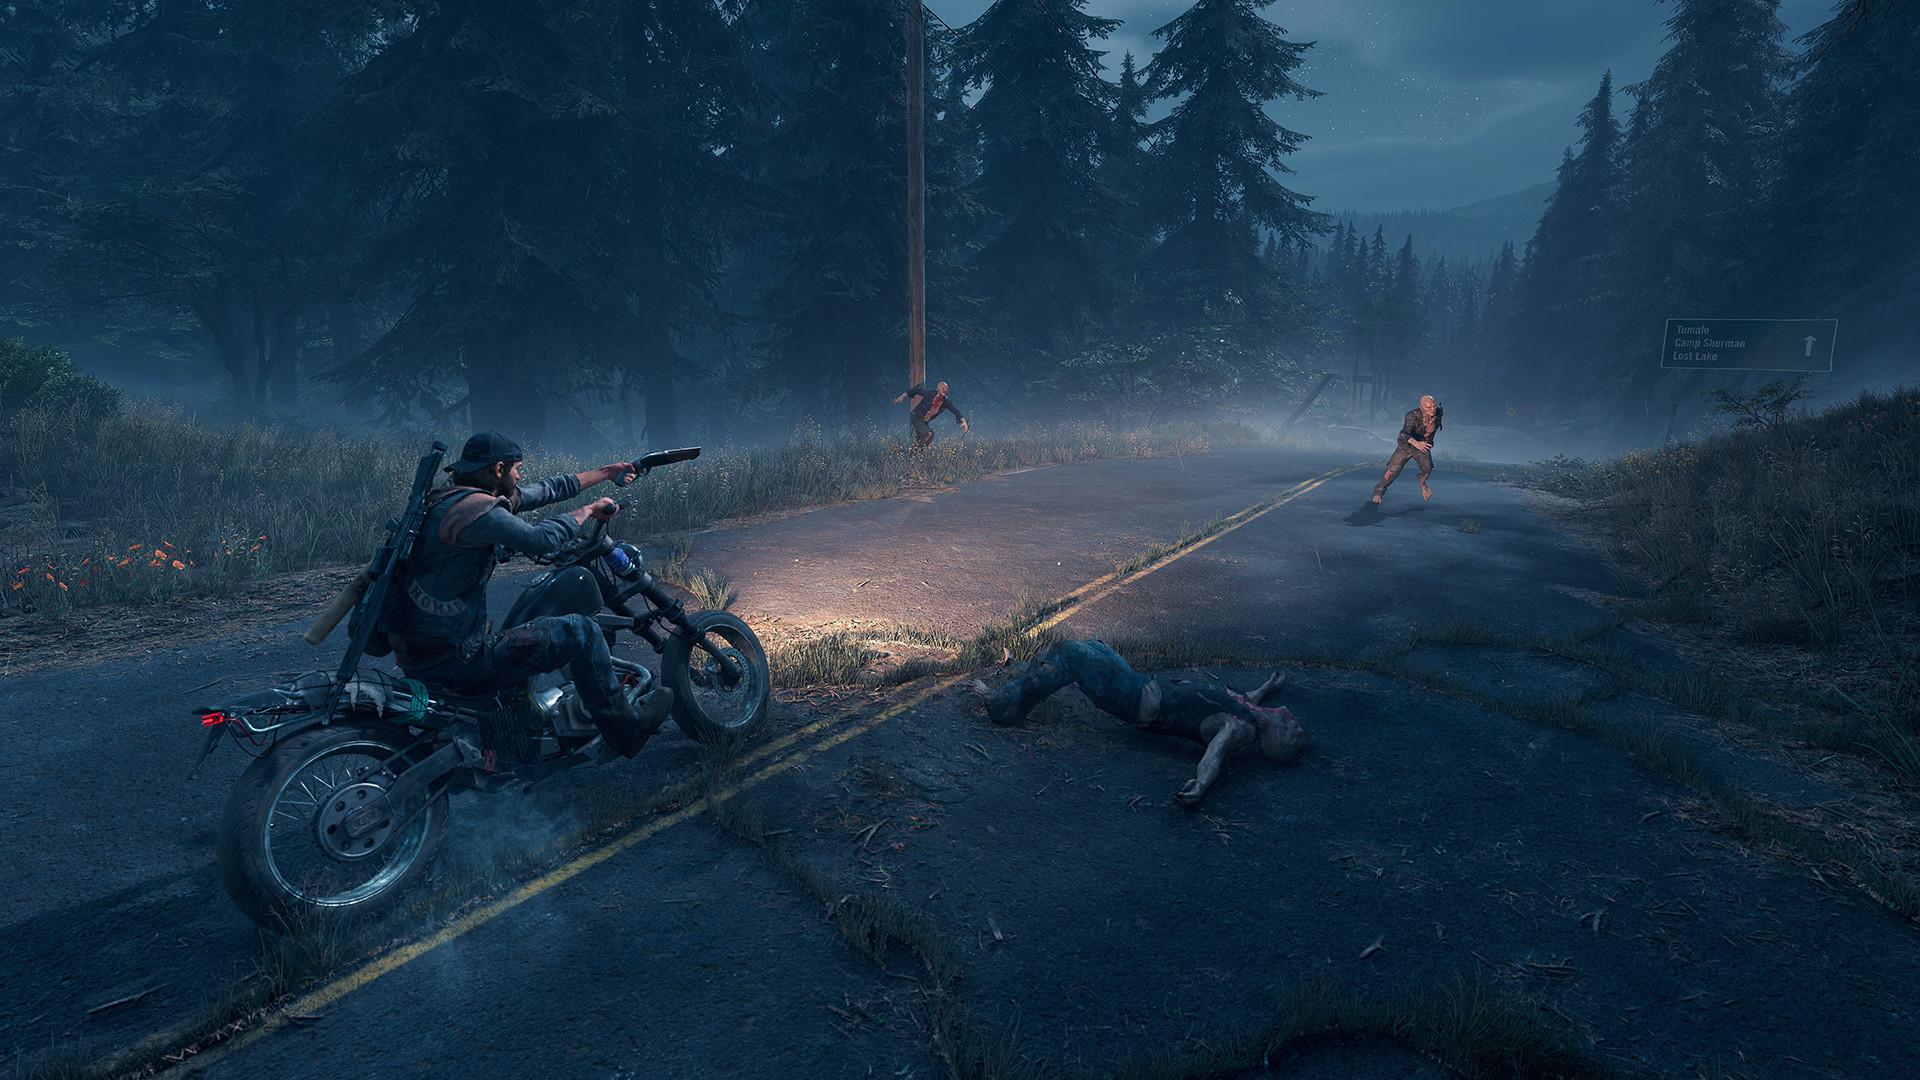 Screenshot №7 from game Days Gone